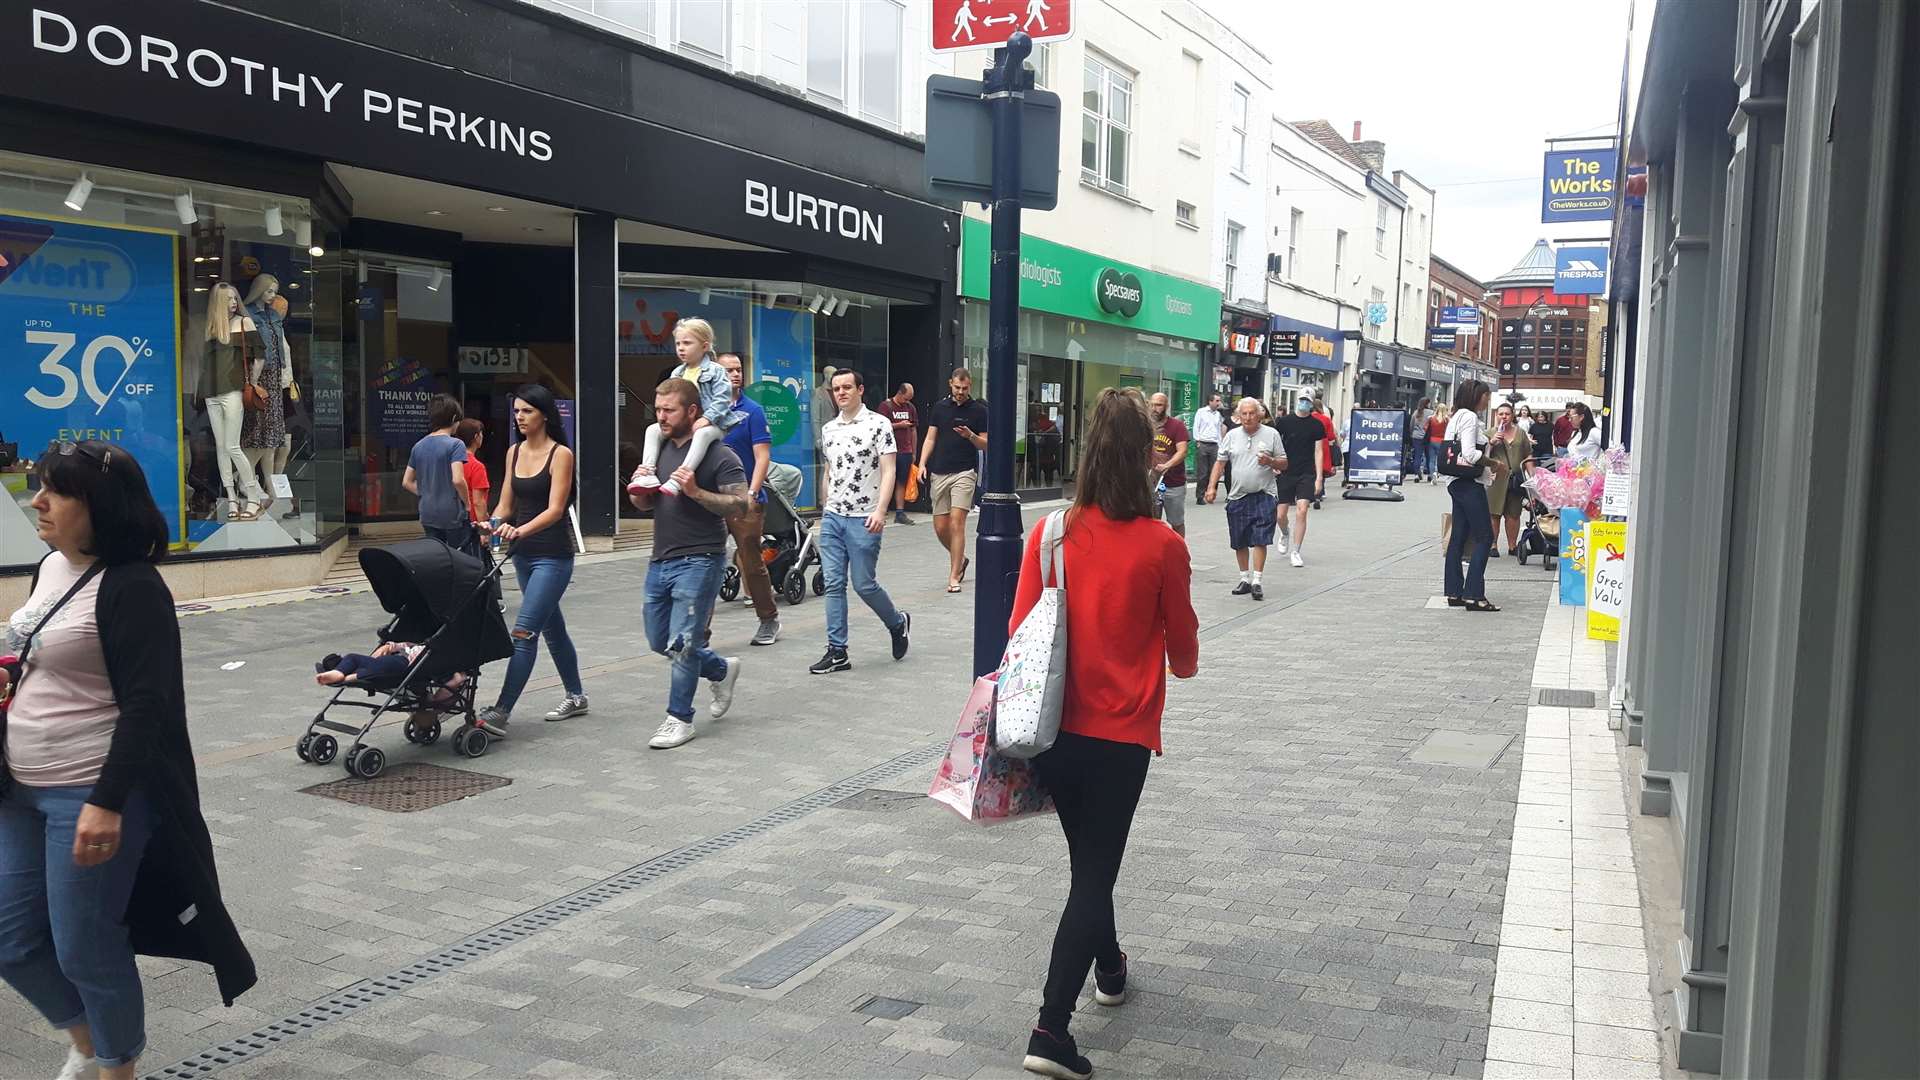 Before Monday, non-essential shops had been closed for about three months